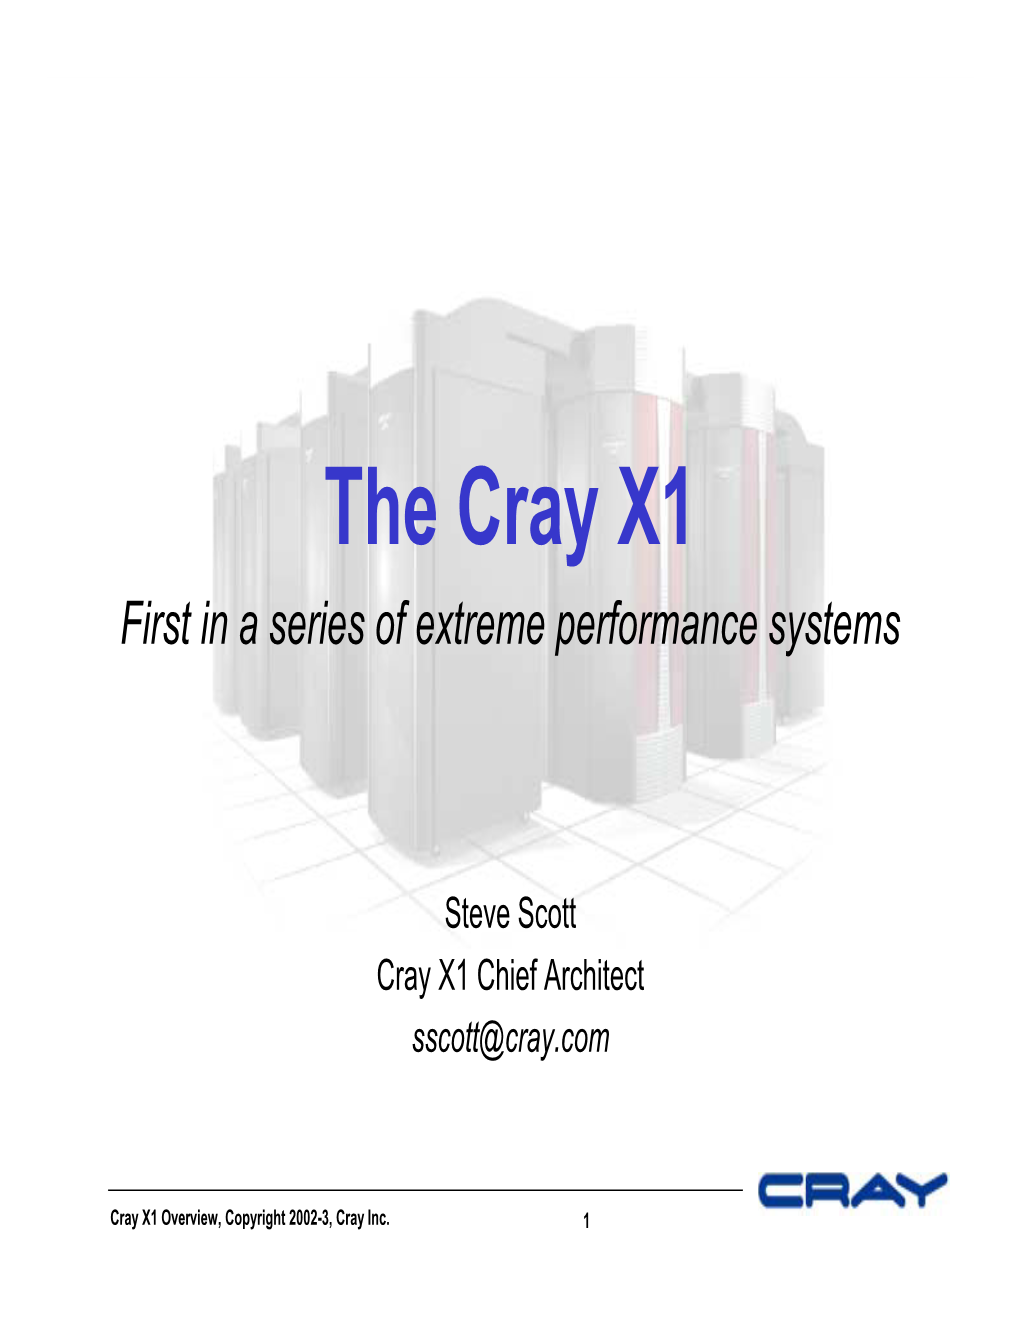 The Cray X1 First in a Series of Extreme Performance Systems